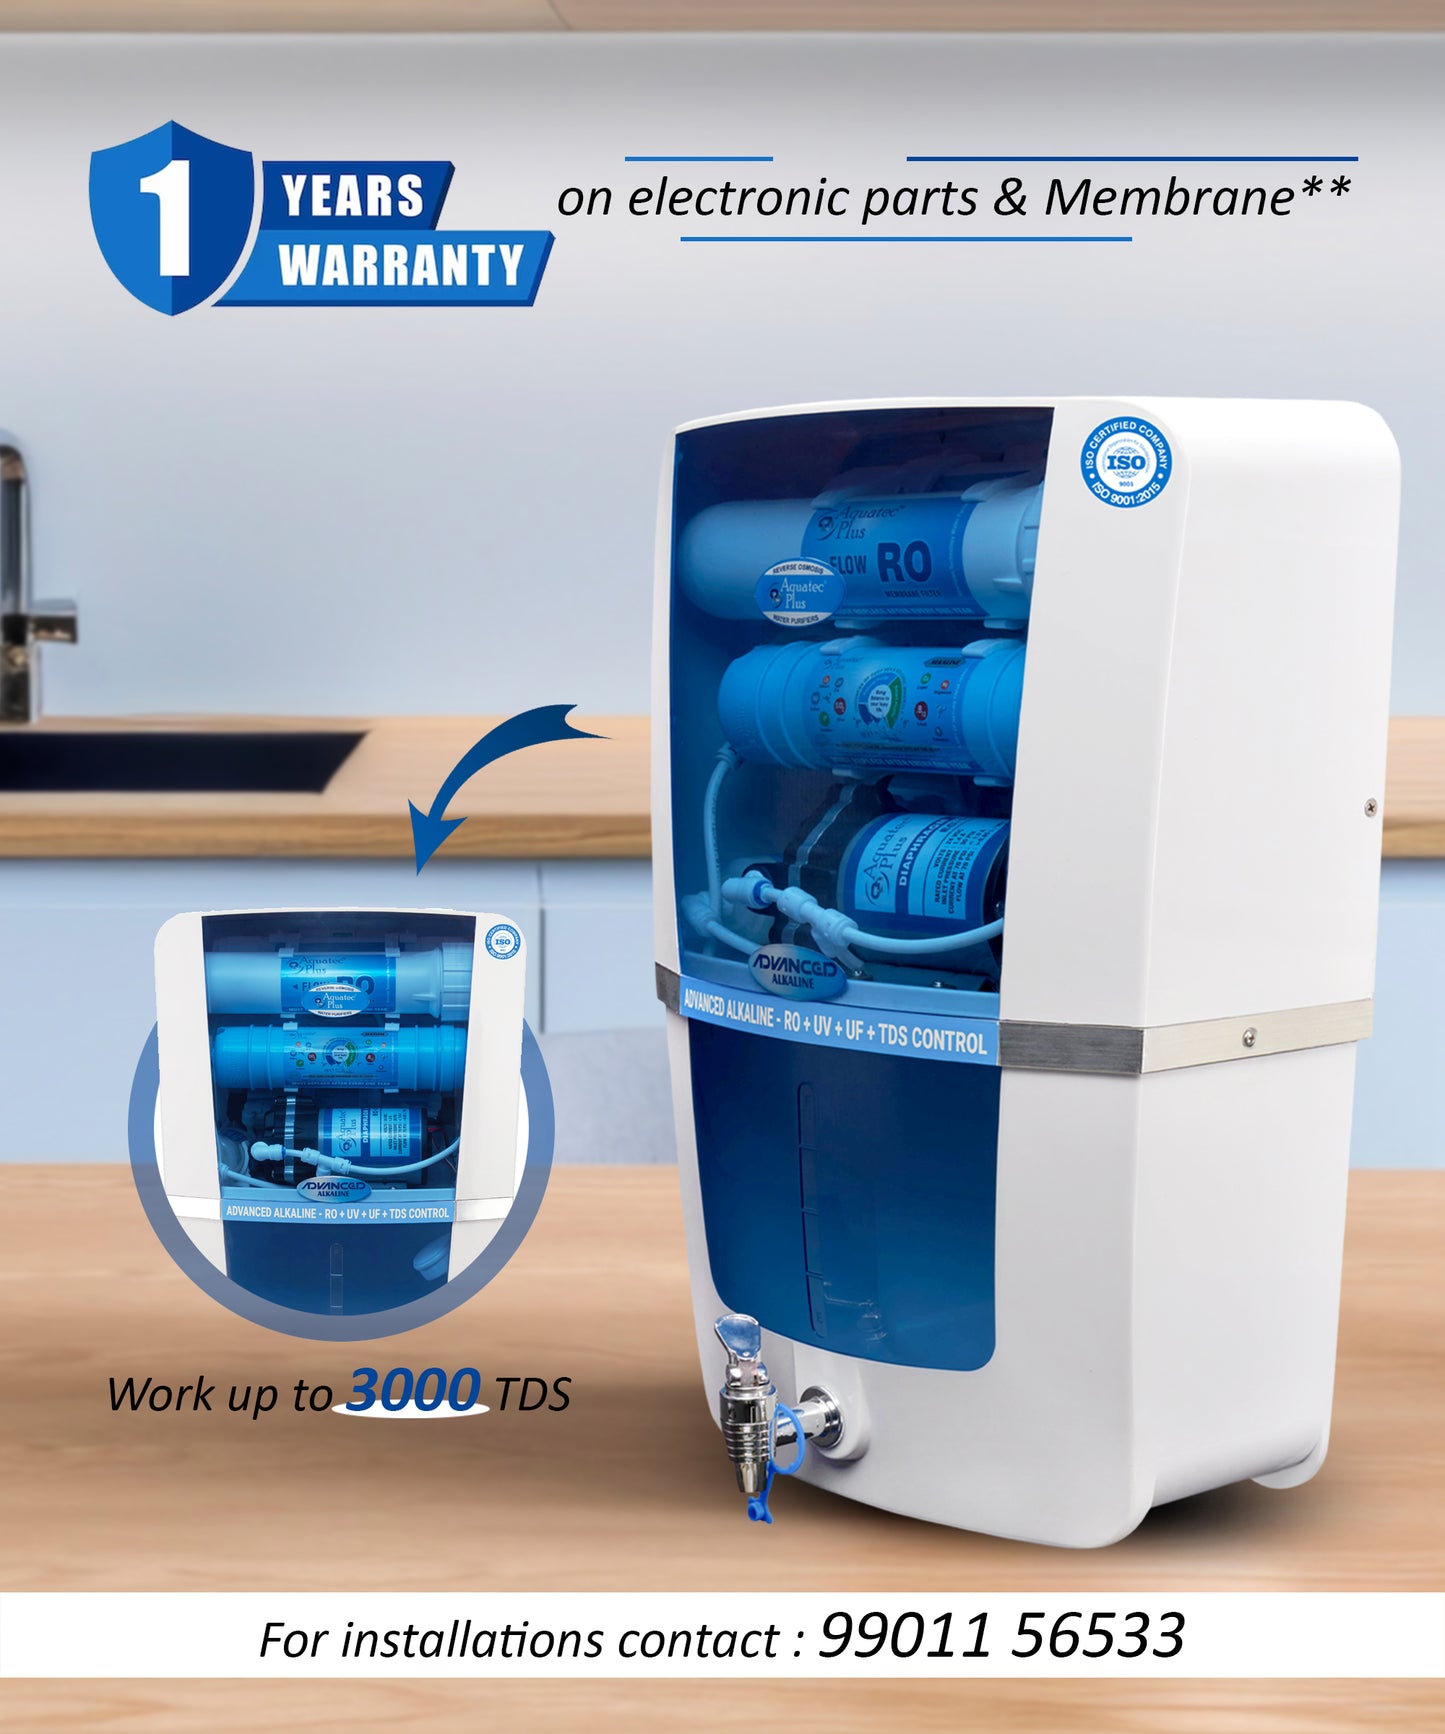 Advanced Alkaline 12L RO+UV+UF+TDS Water Purifier for Home (White, Blue)